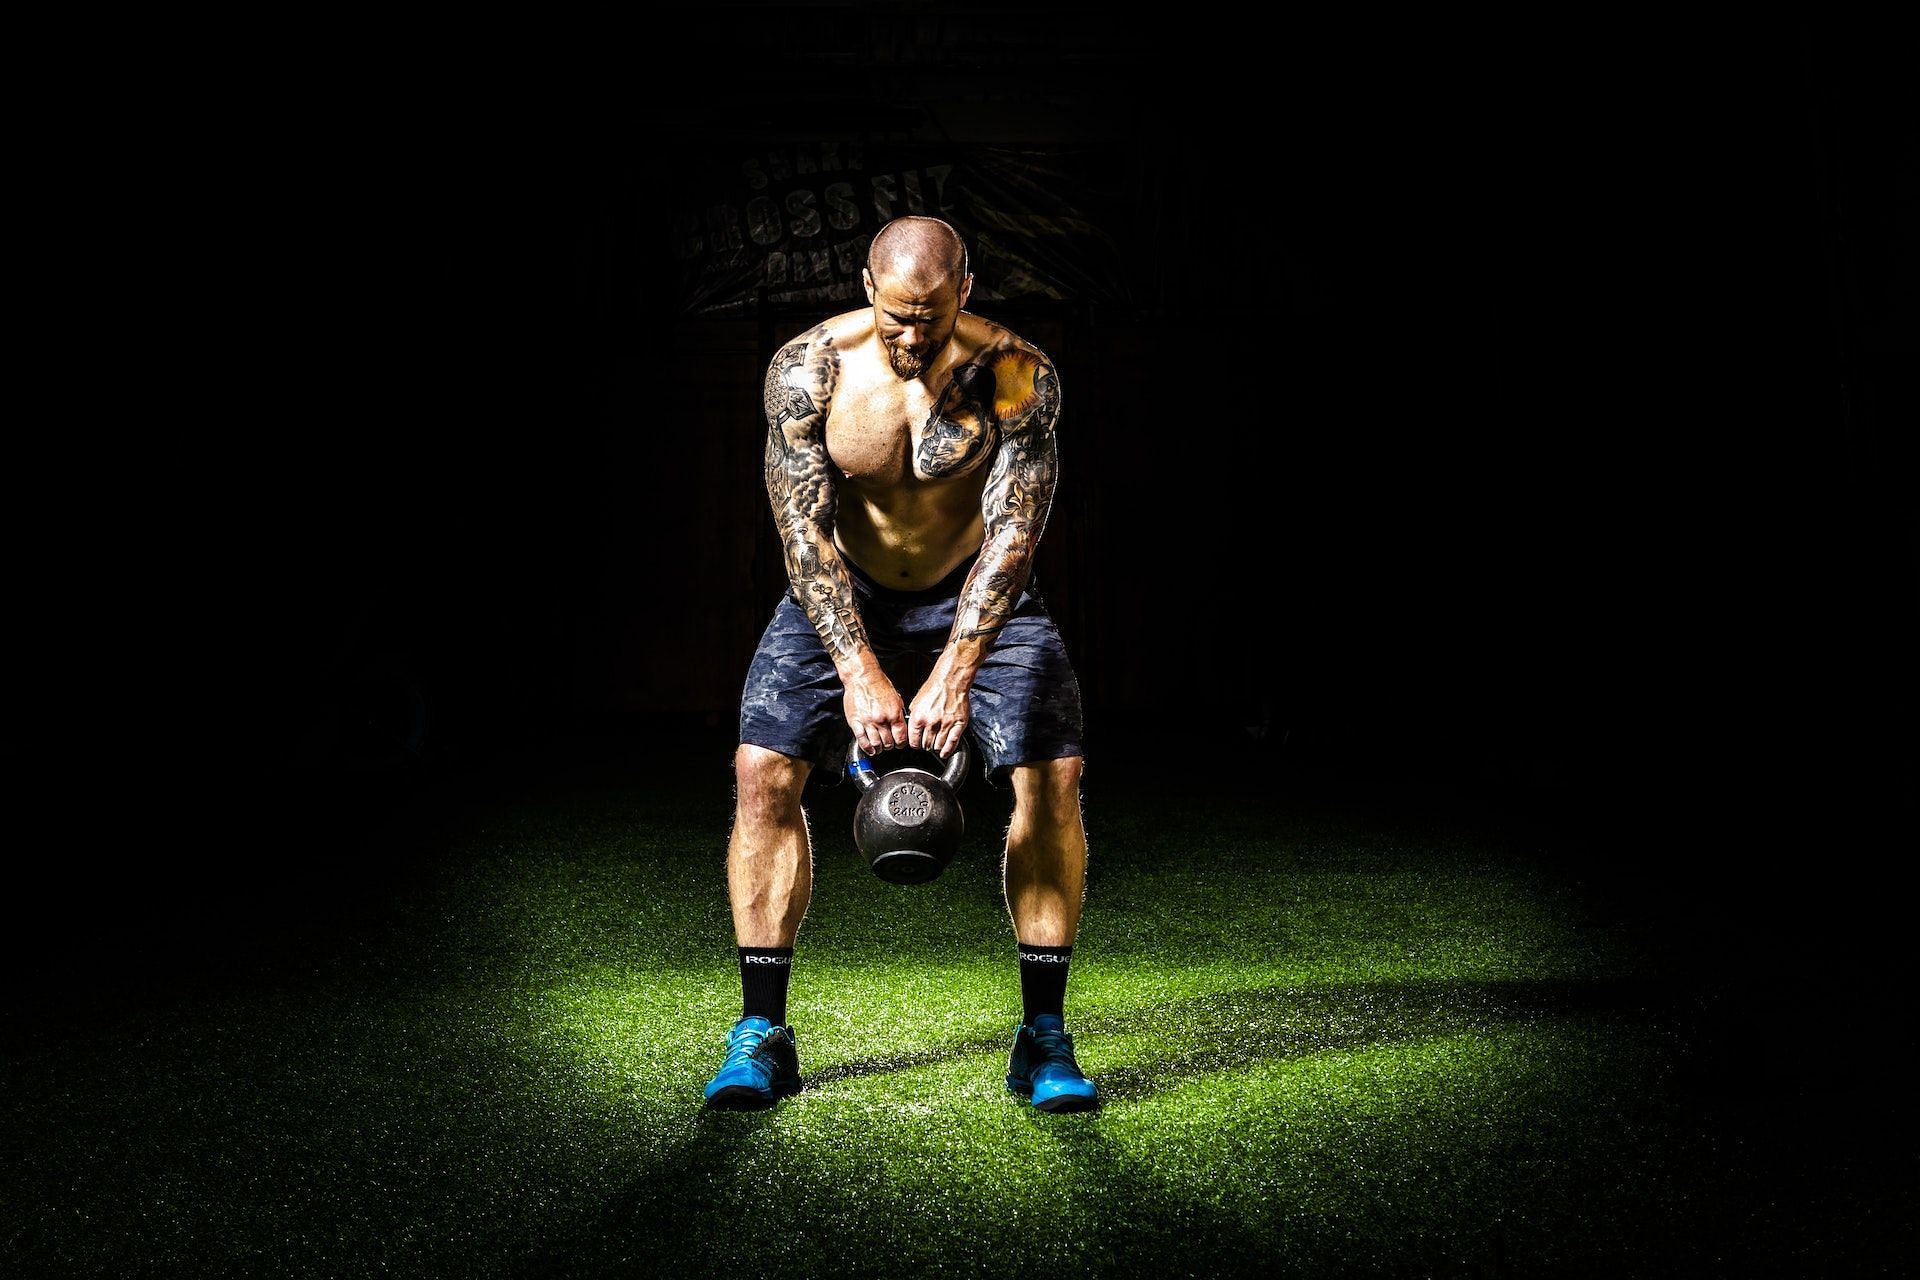 Kettlebell swing help build strength in your posterior chain muscles. (Photo via Pexels/Binyamin Mellish)